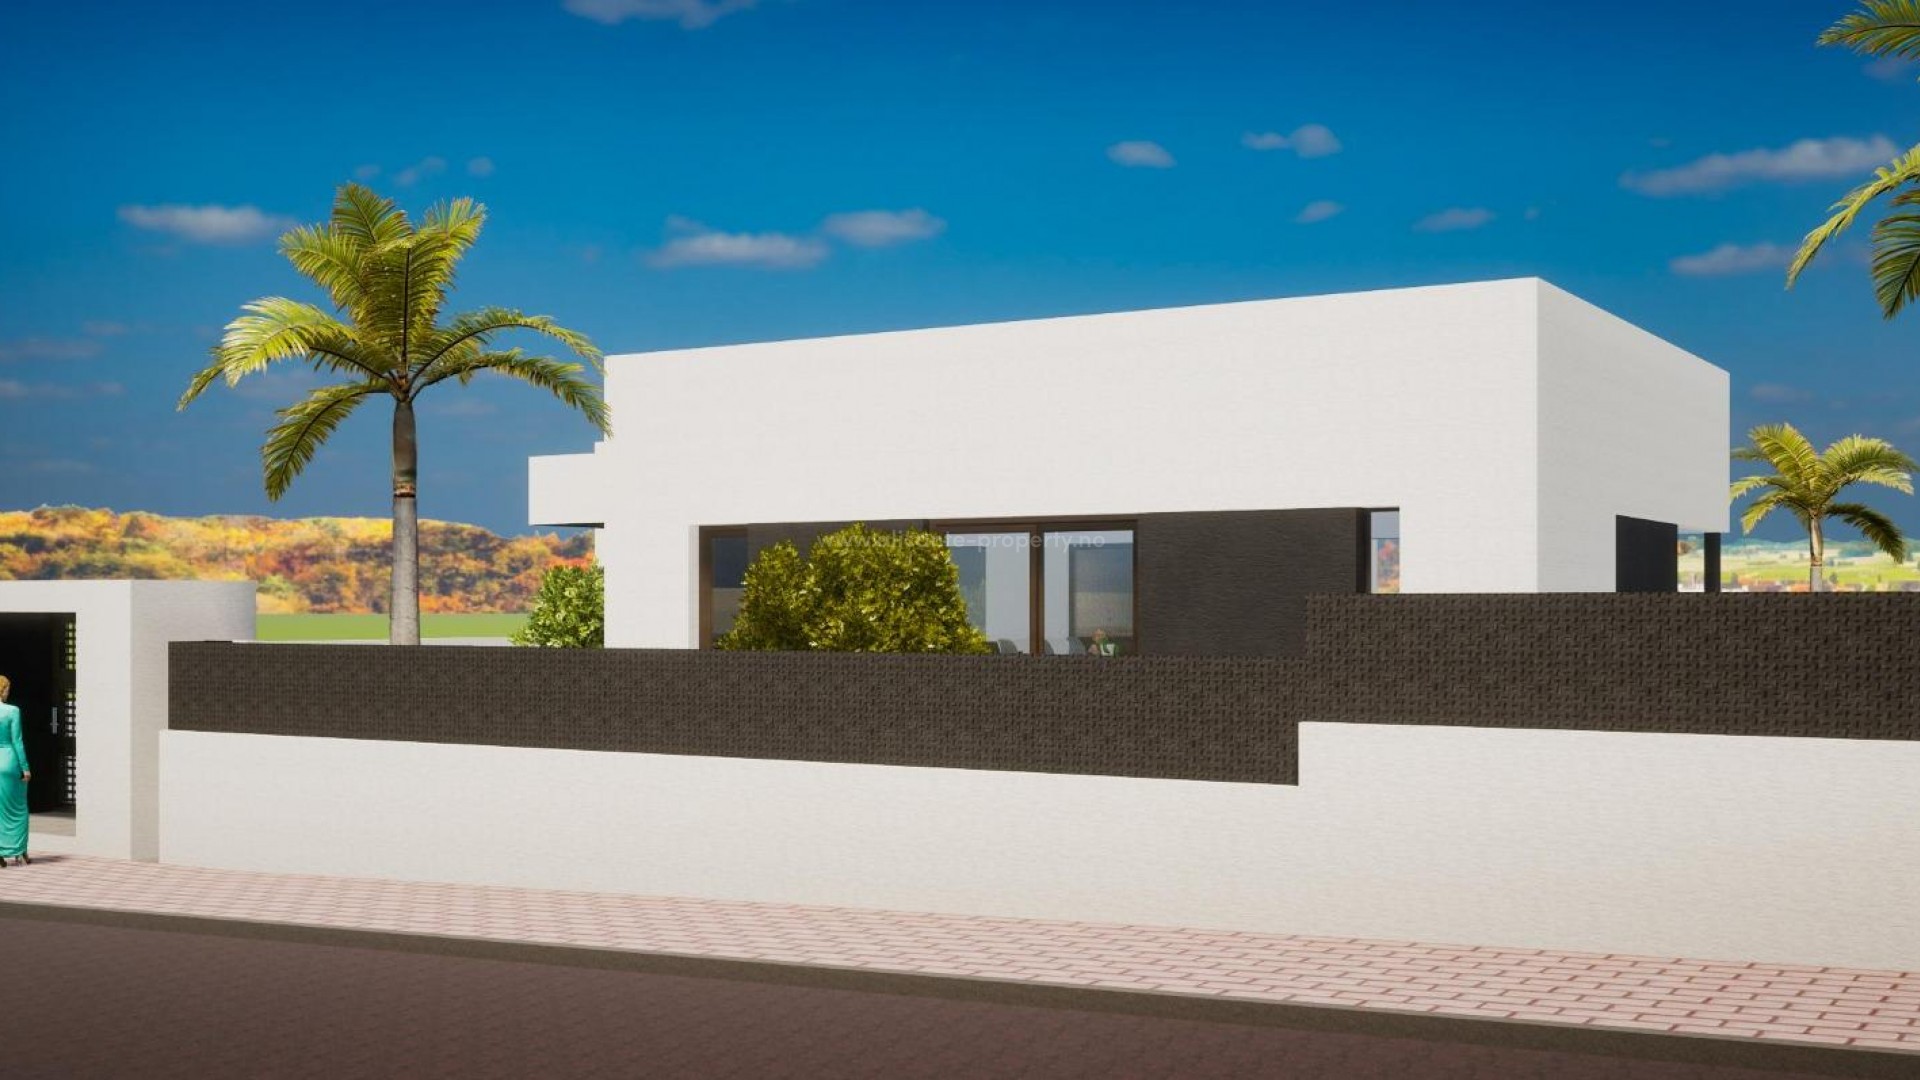 Fantastic newly built villas in Alfaz del Pi, 3 bedrooms, 2 bathrooms, large patio with nice pool, large sliding window to the outdoor pool